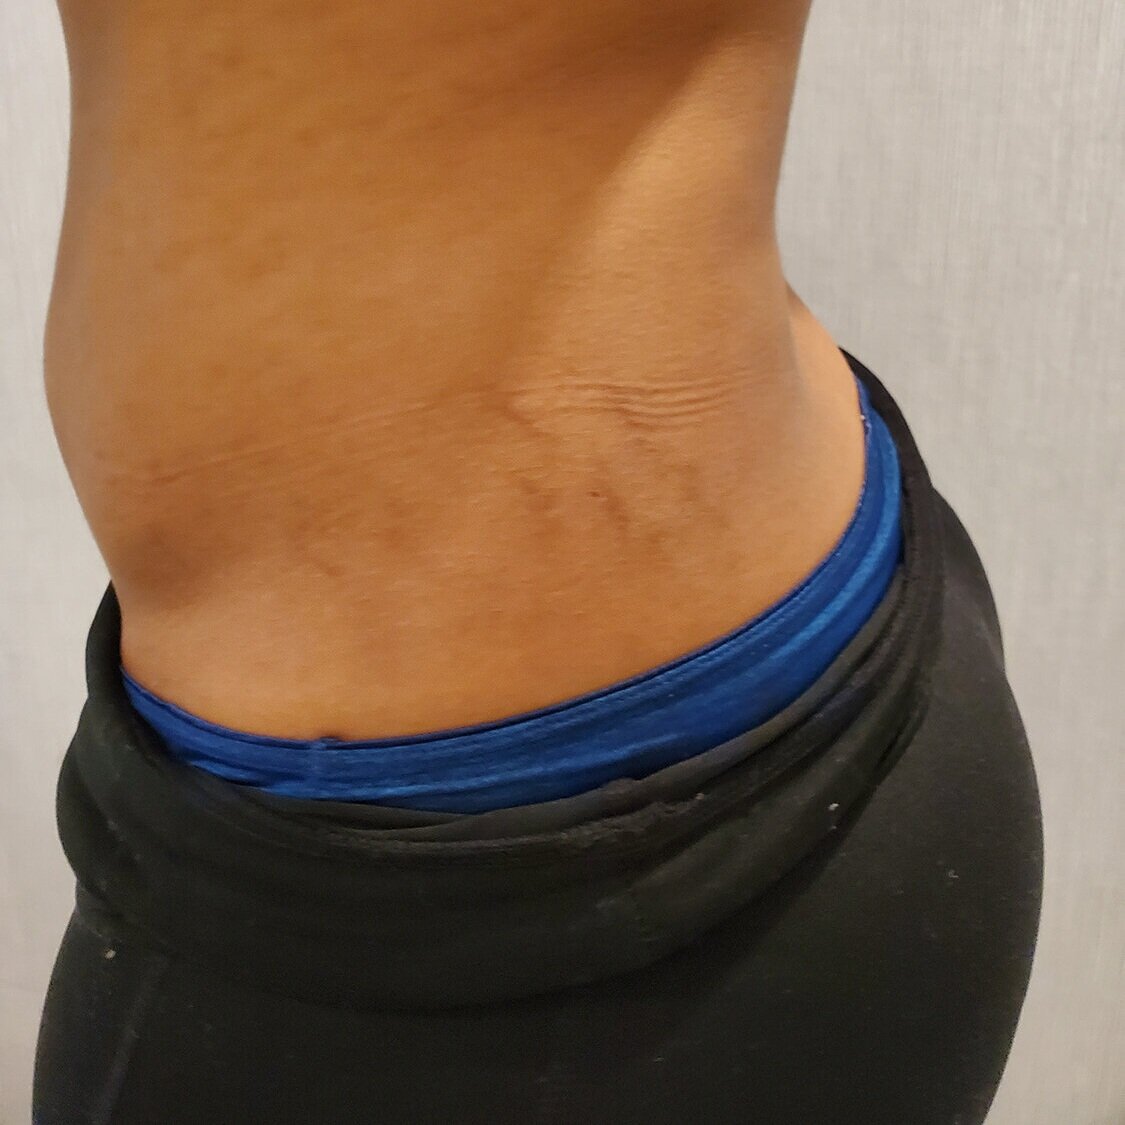 Laser+Stretch+Mark+Reduction+Before+1a.jpg